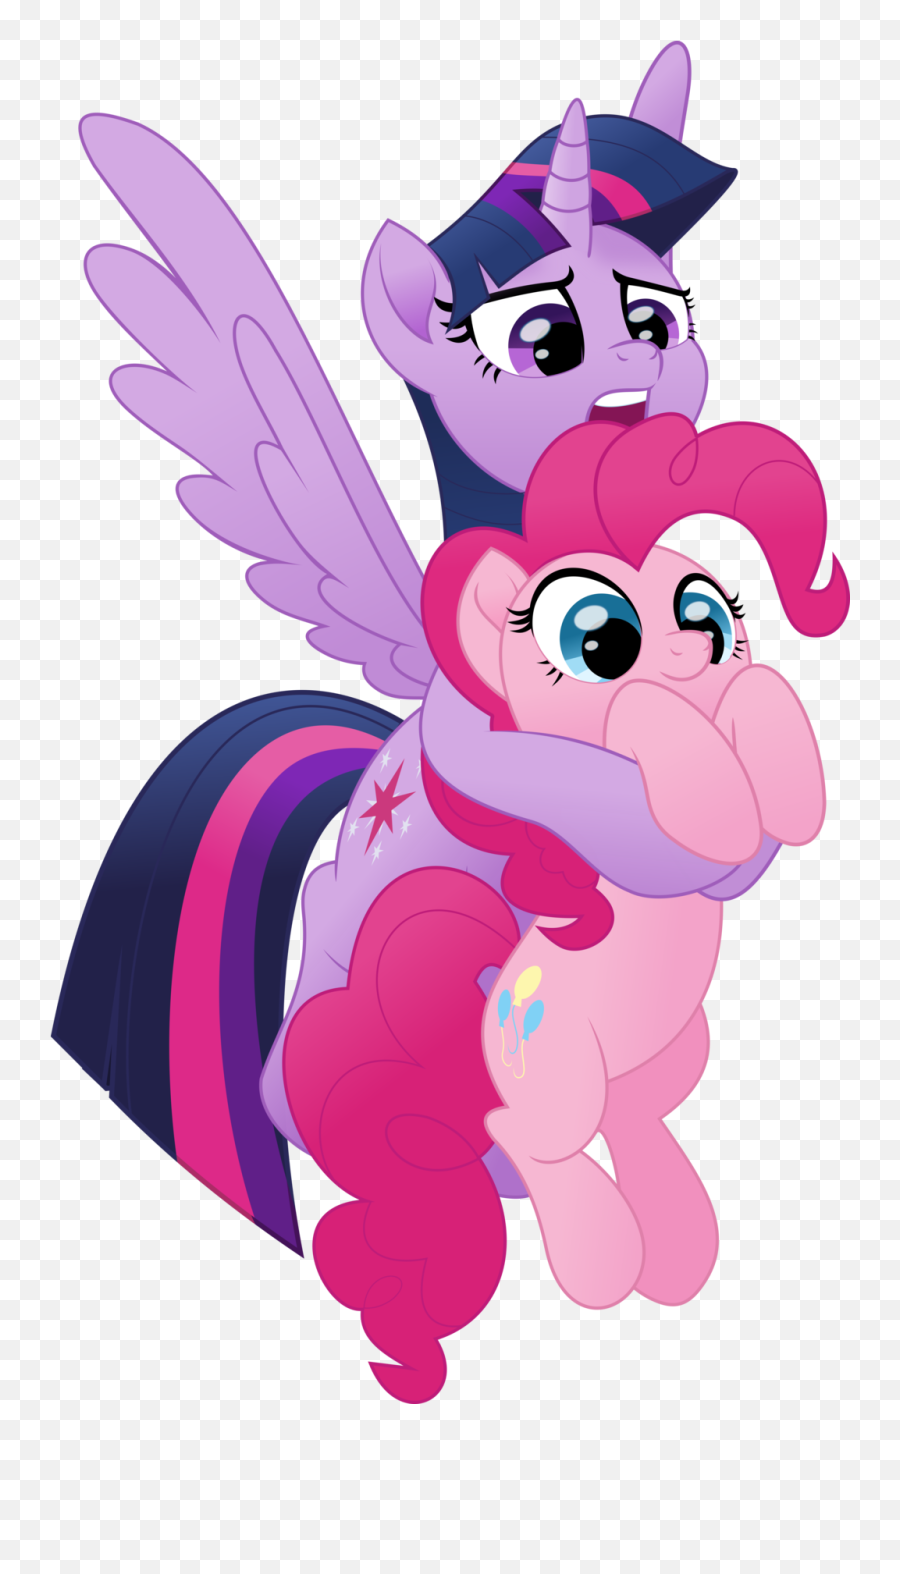 Pinkie Pie With Unicorn Horn - My Little Pony Twilight Sparkle And Pinkie Pie Png,Unicorn Horn Transparent